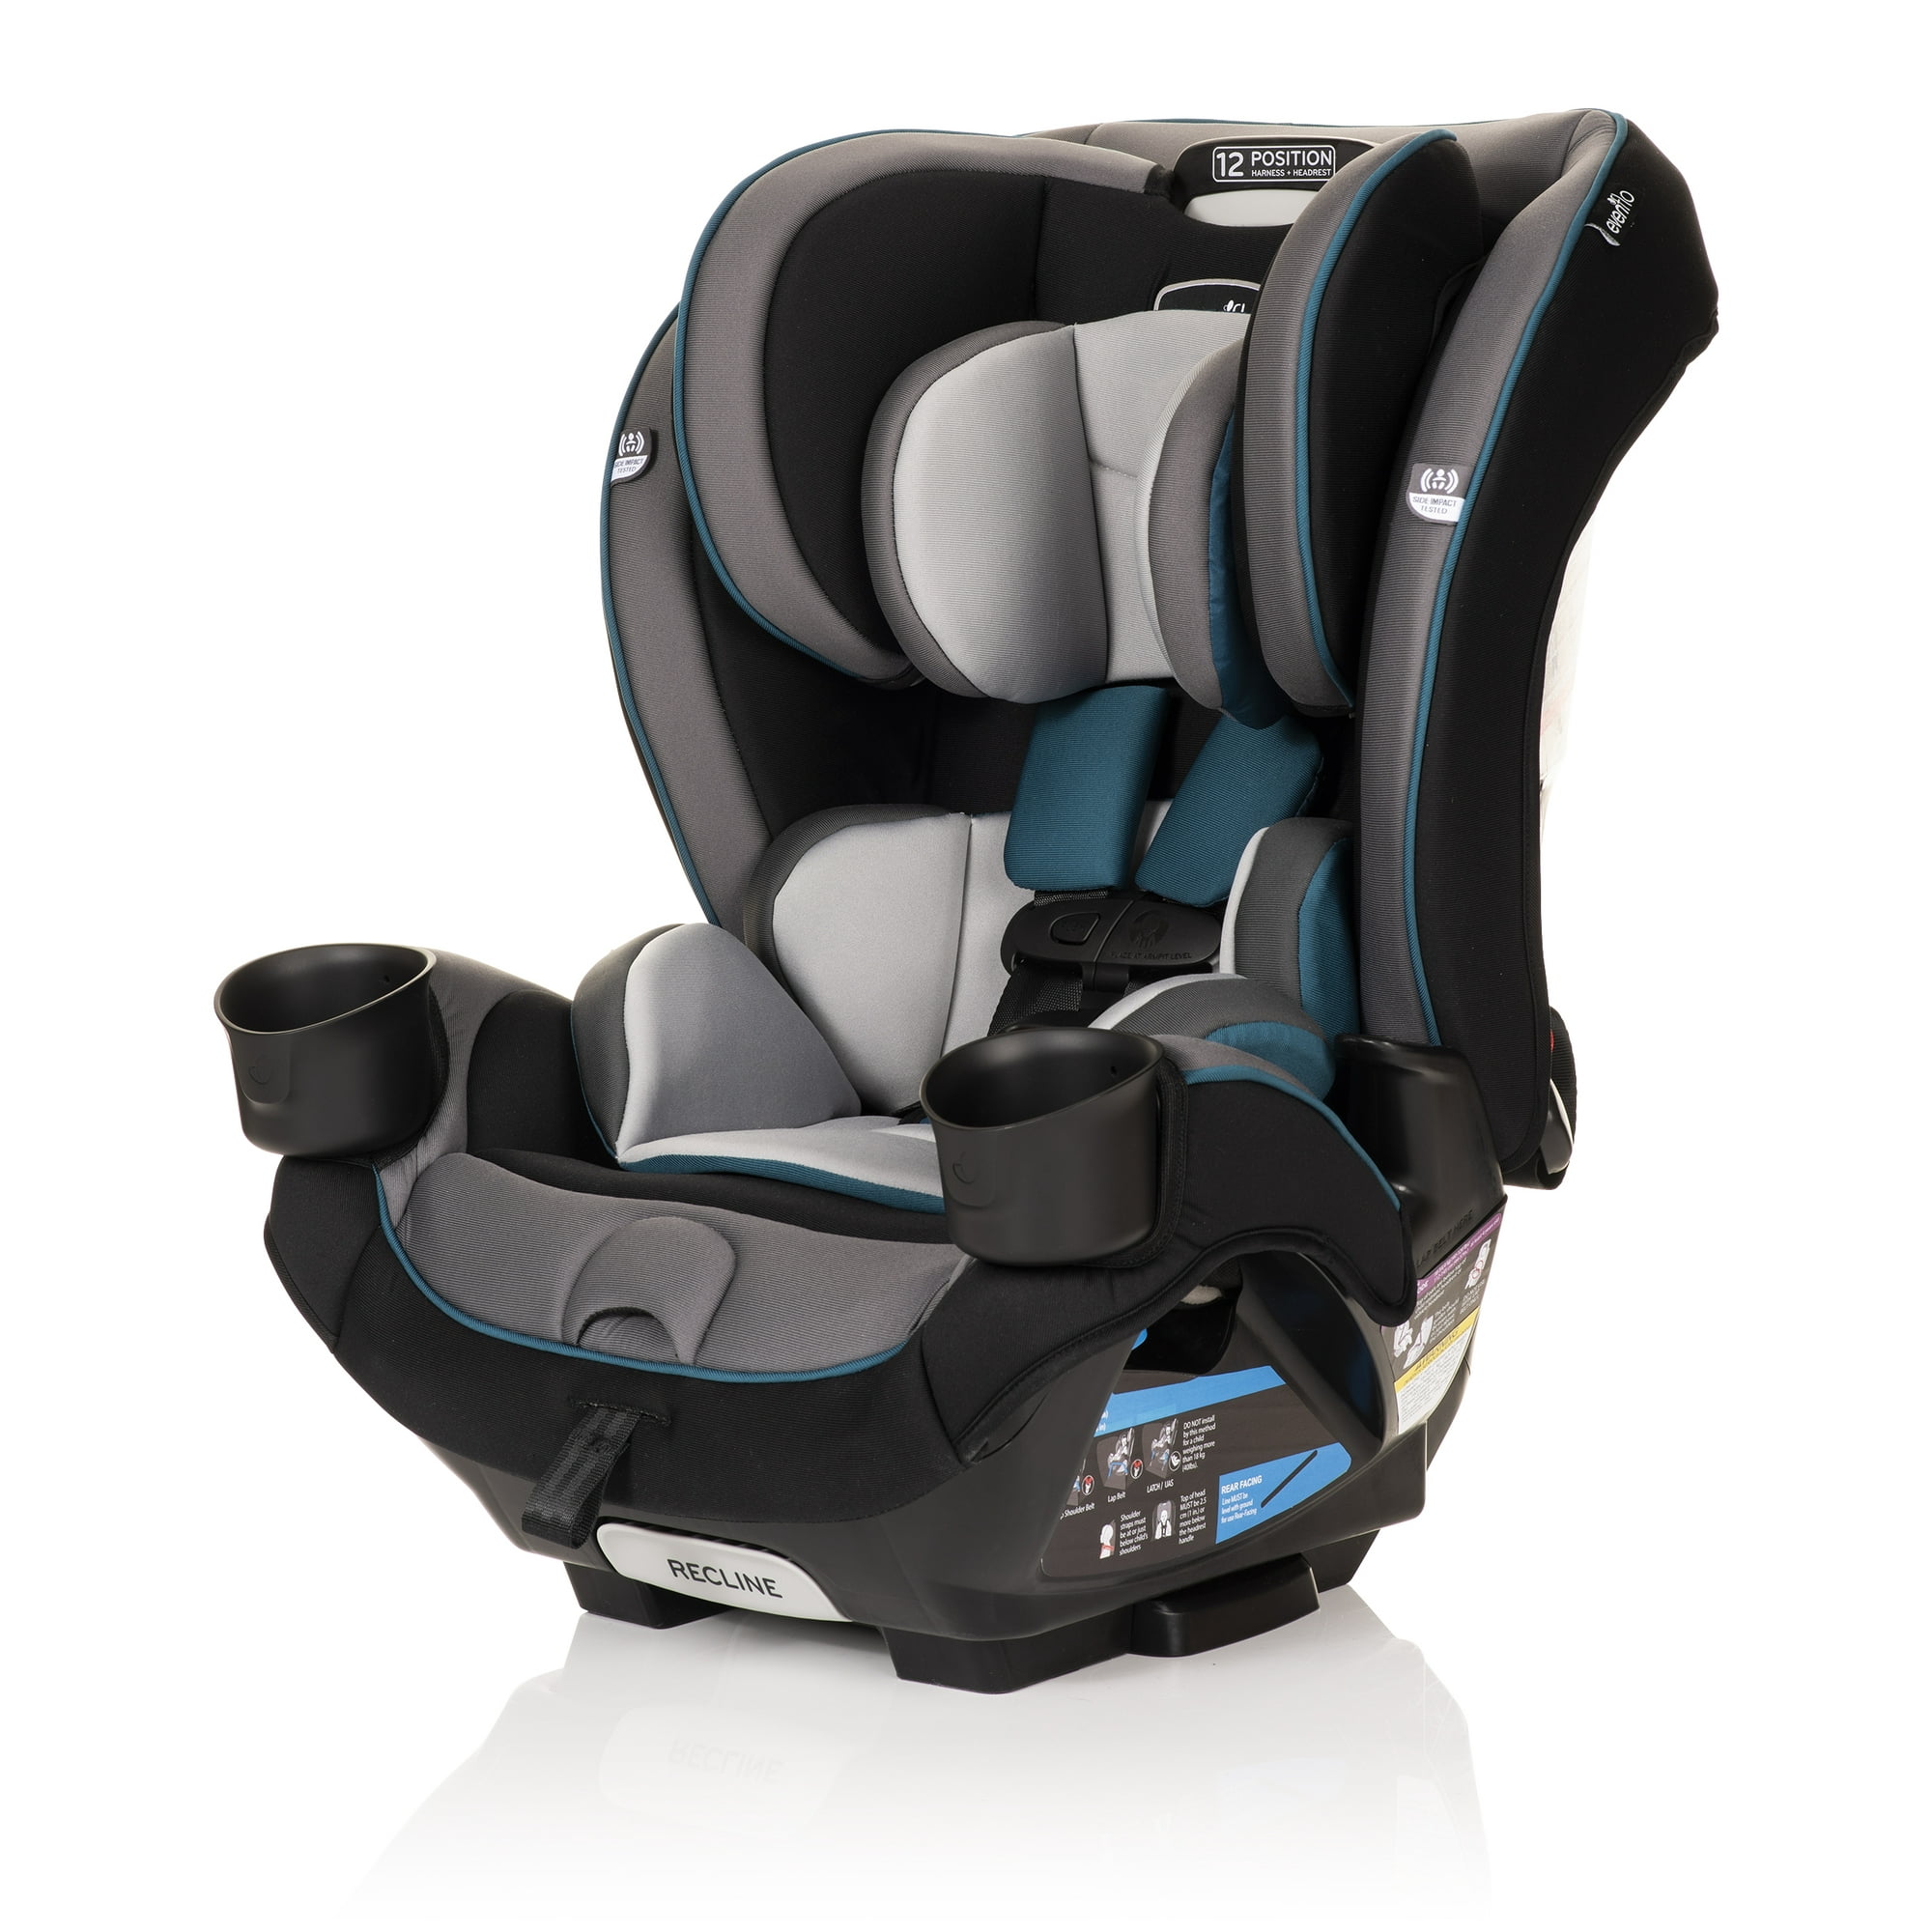 Evenflo EveryKid 4-in-1 Adjustable High-Back Convertible Car Seat